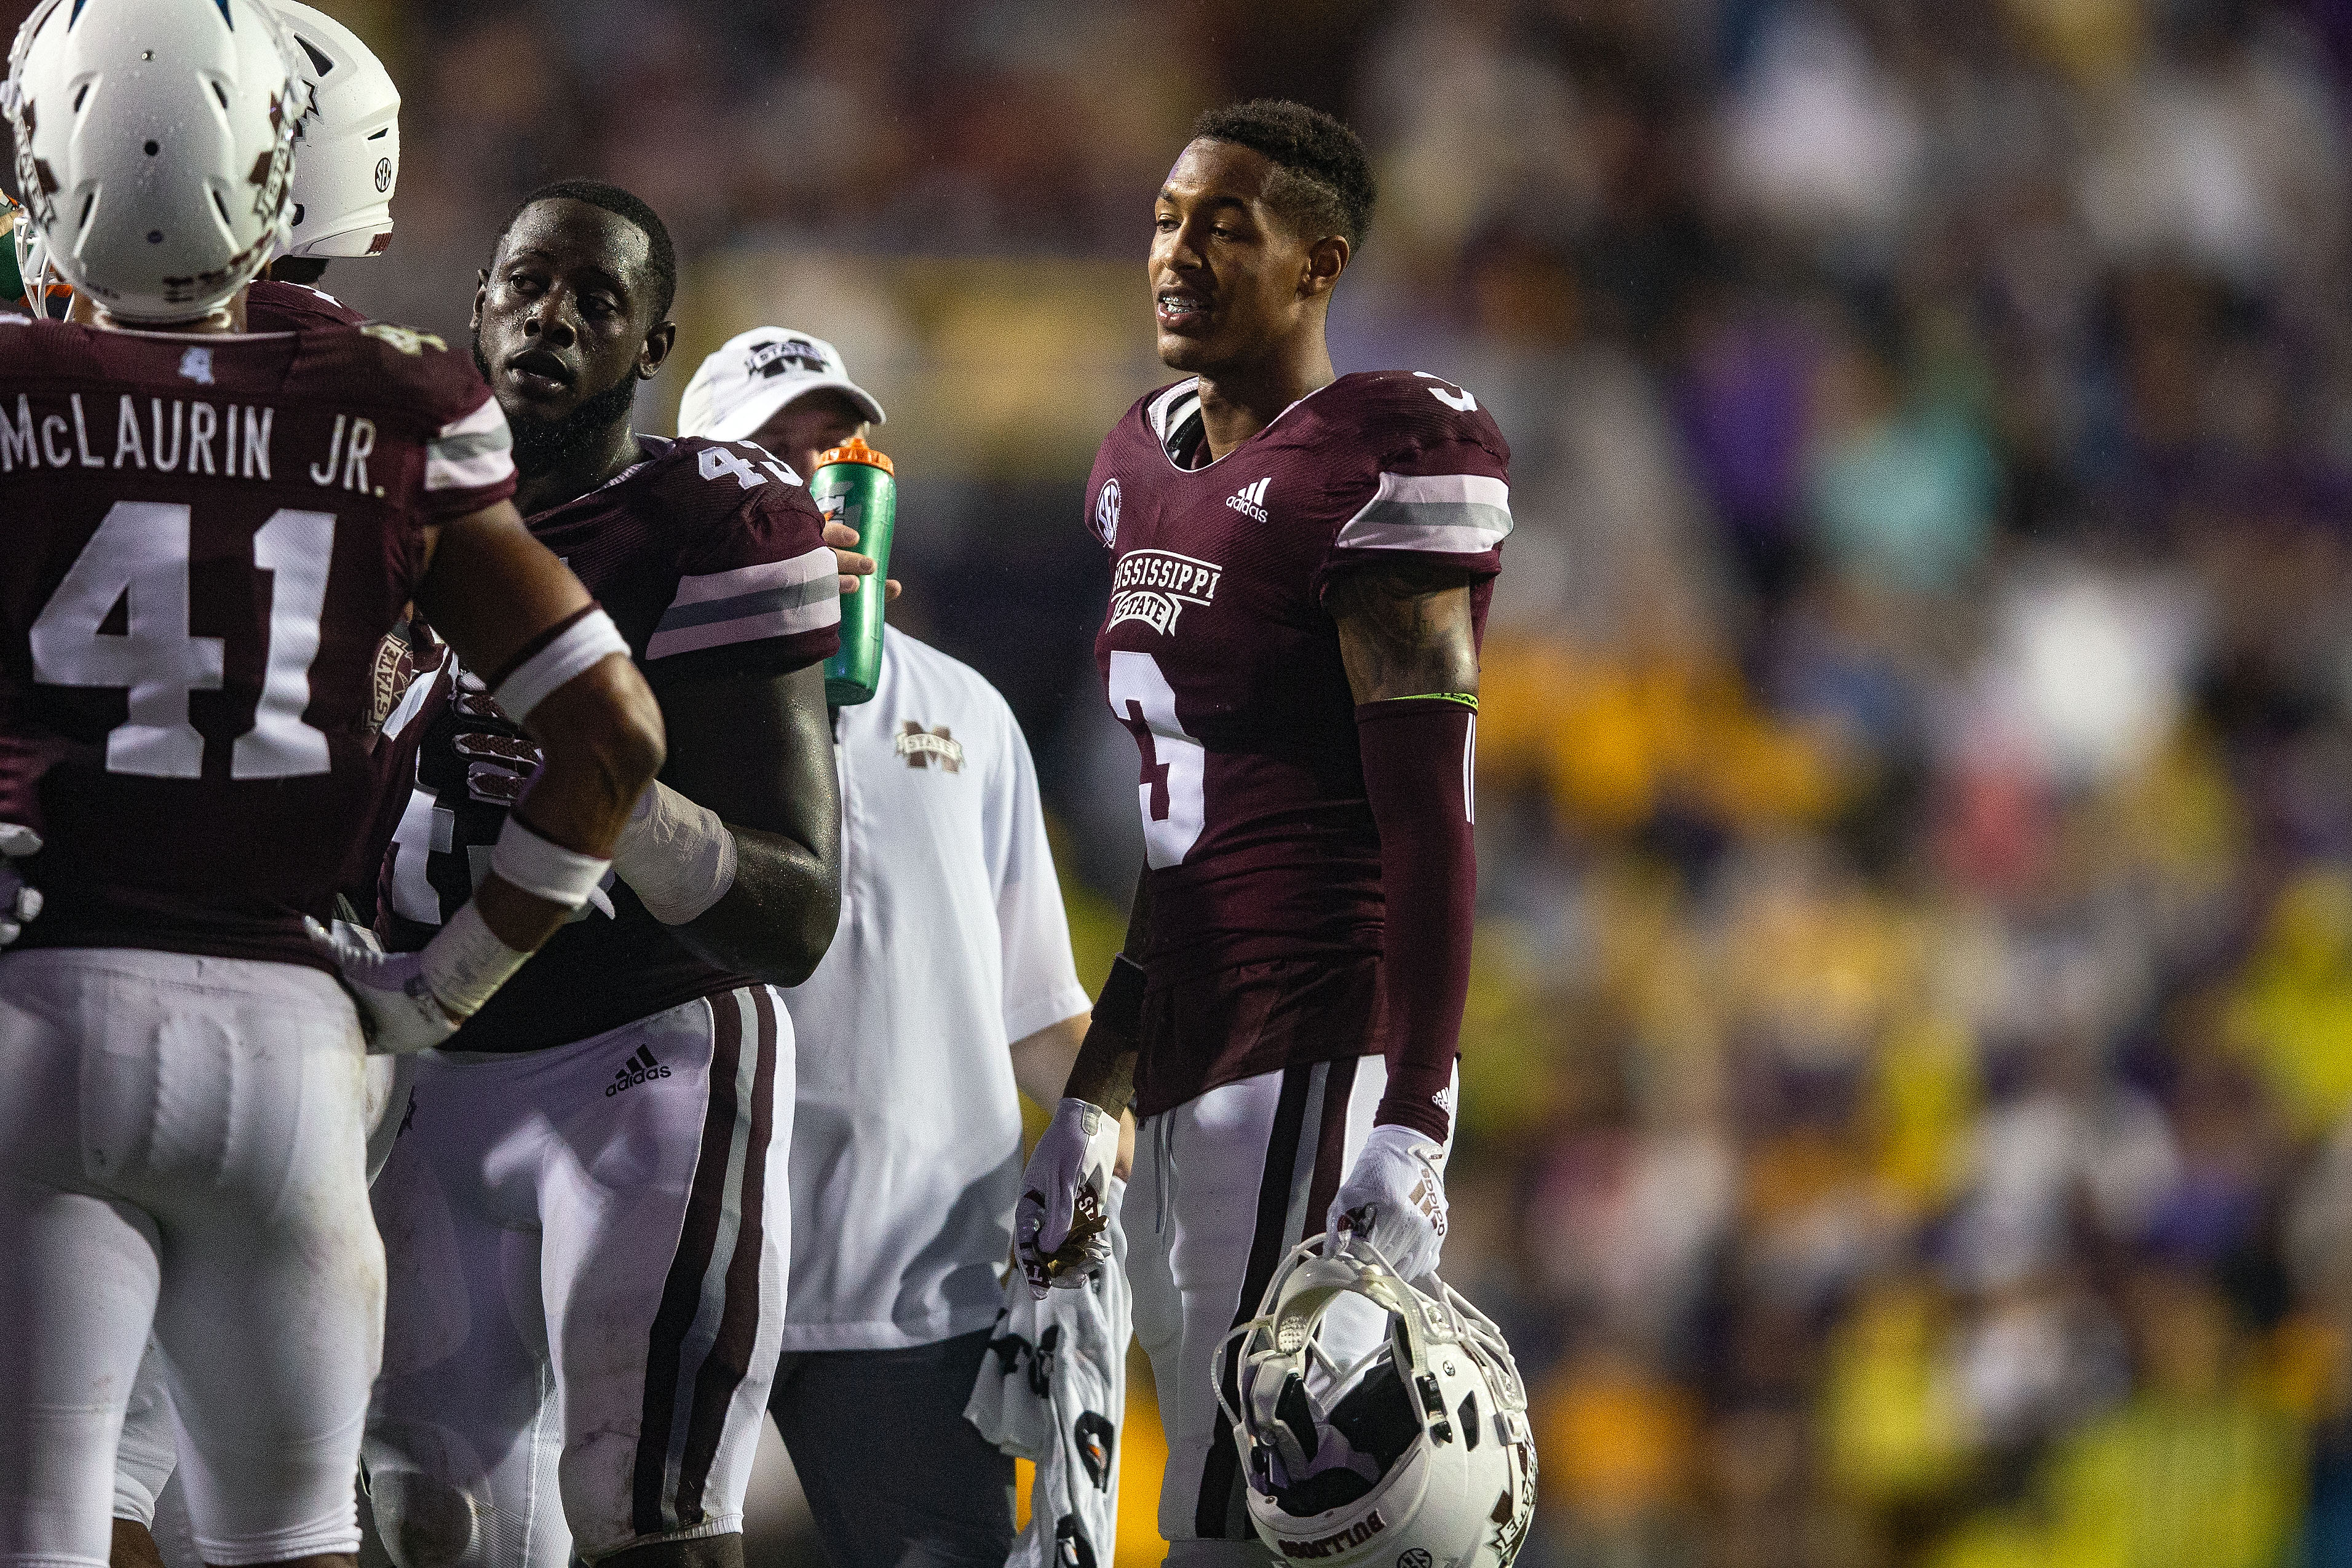 COLLEGE FOOTBALL: OCT 20 Mississippi State at LSU